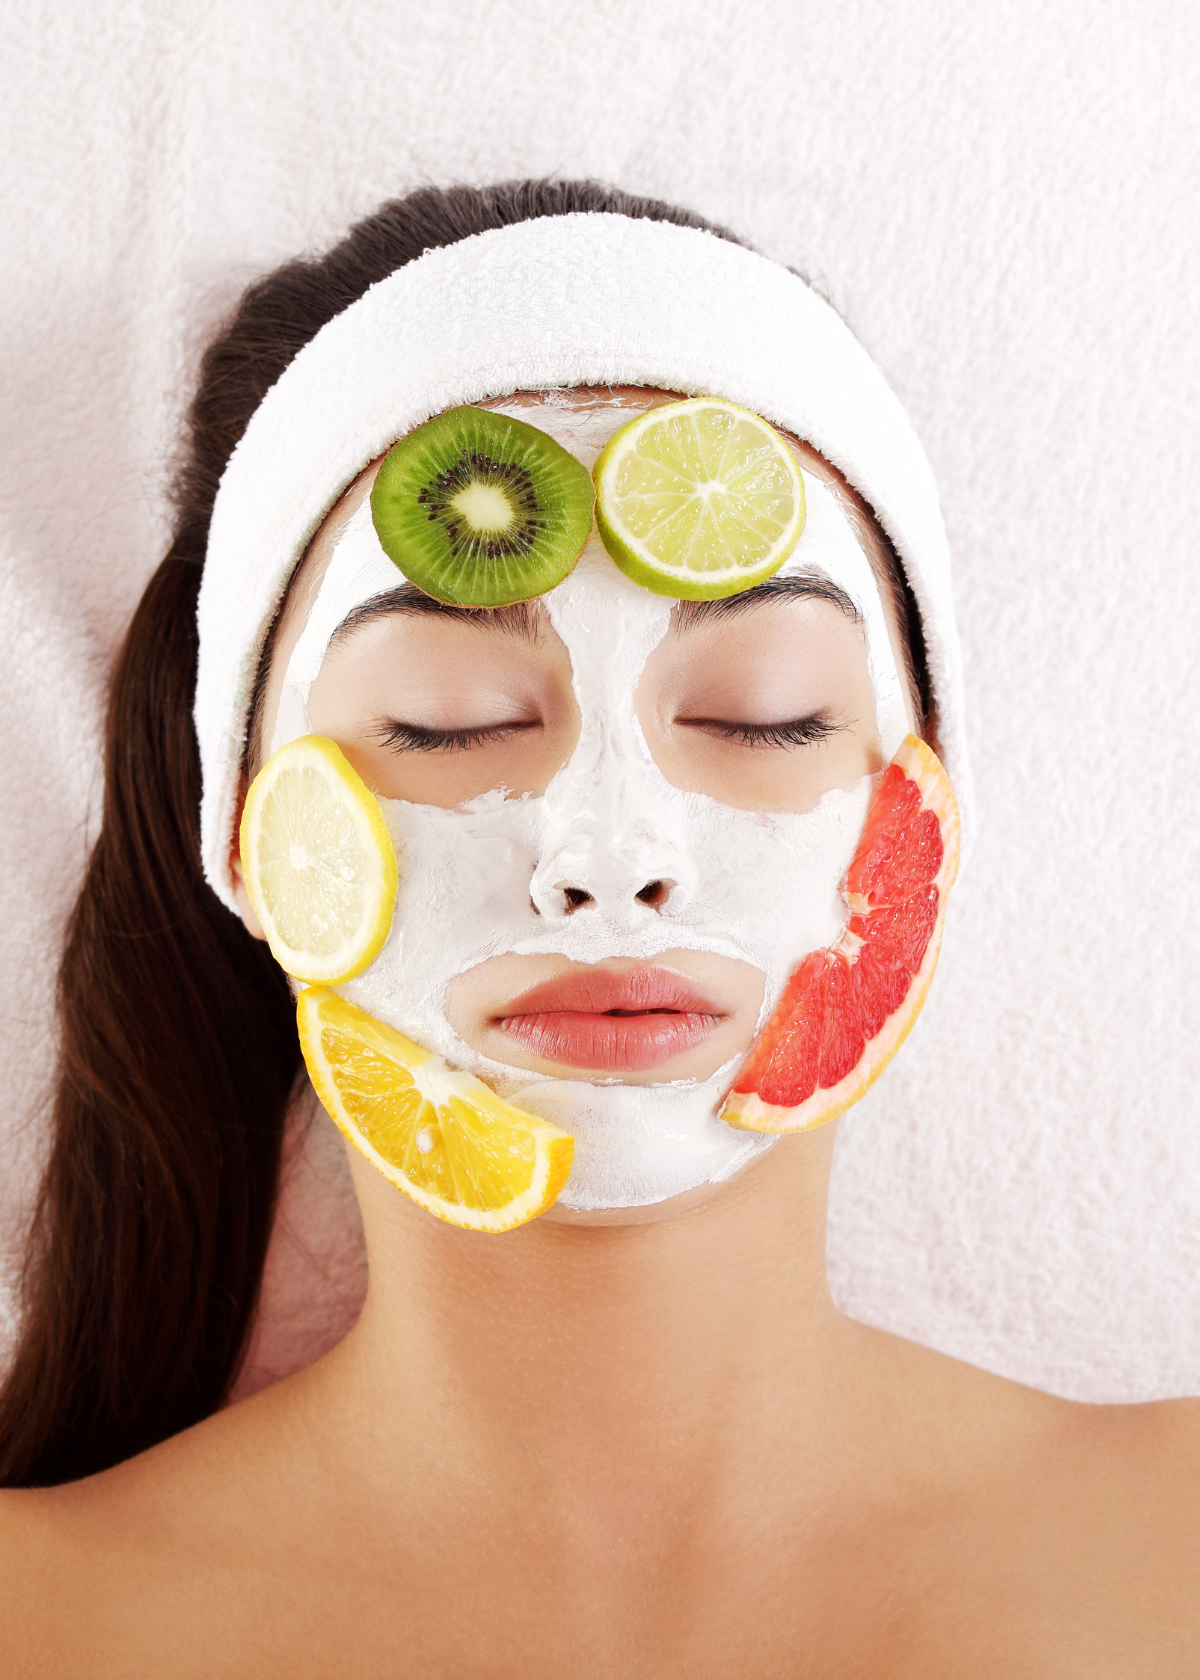 When Is The Best Time To Do A Face Mask: You Might Not Know It